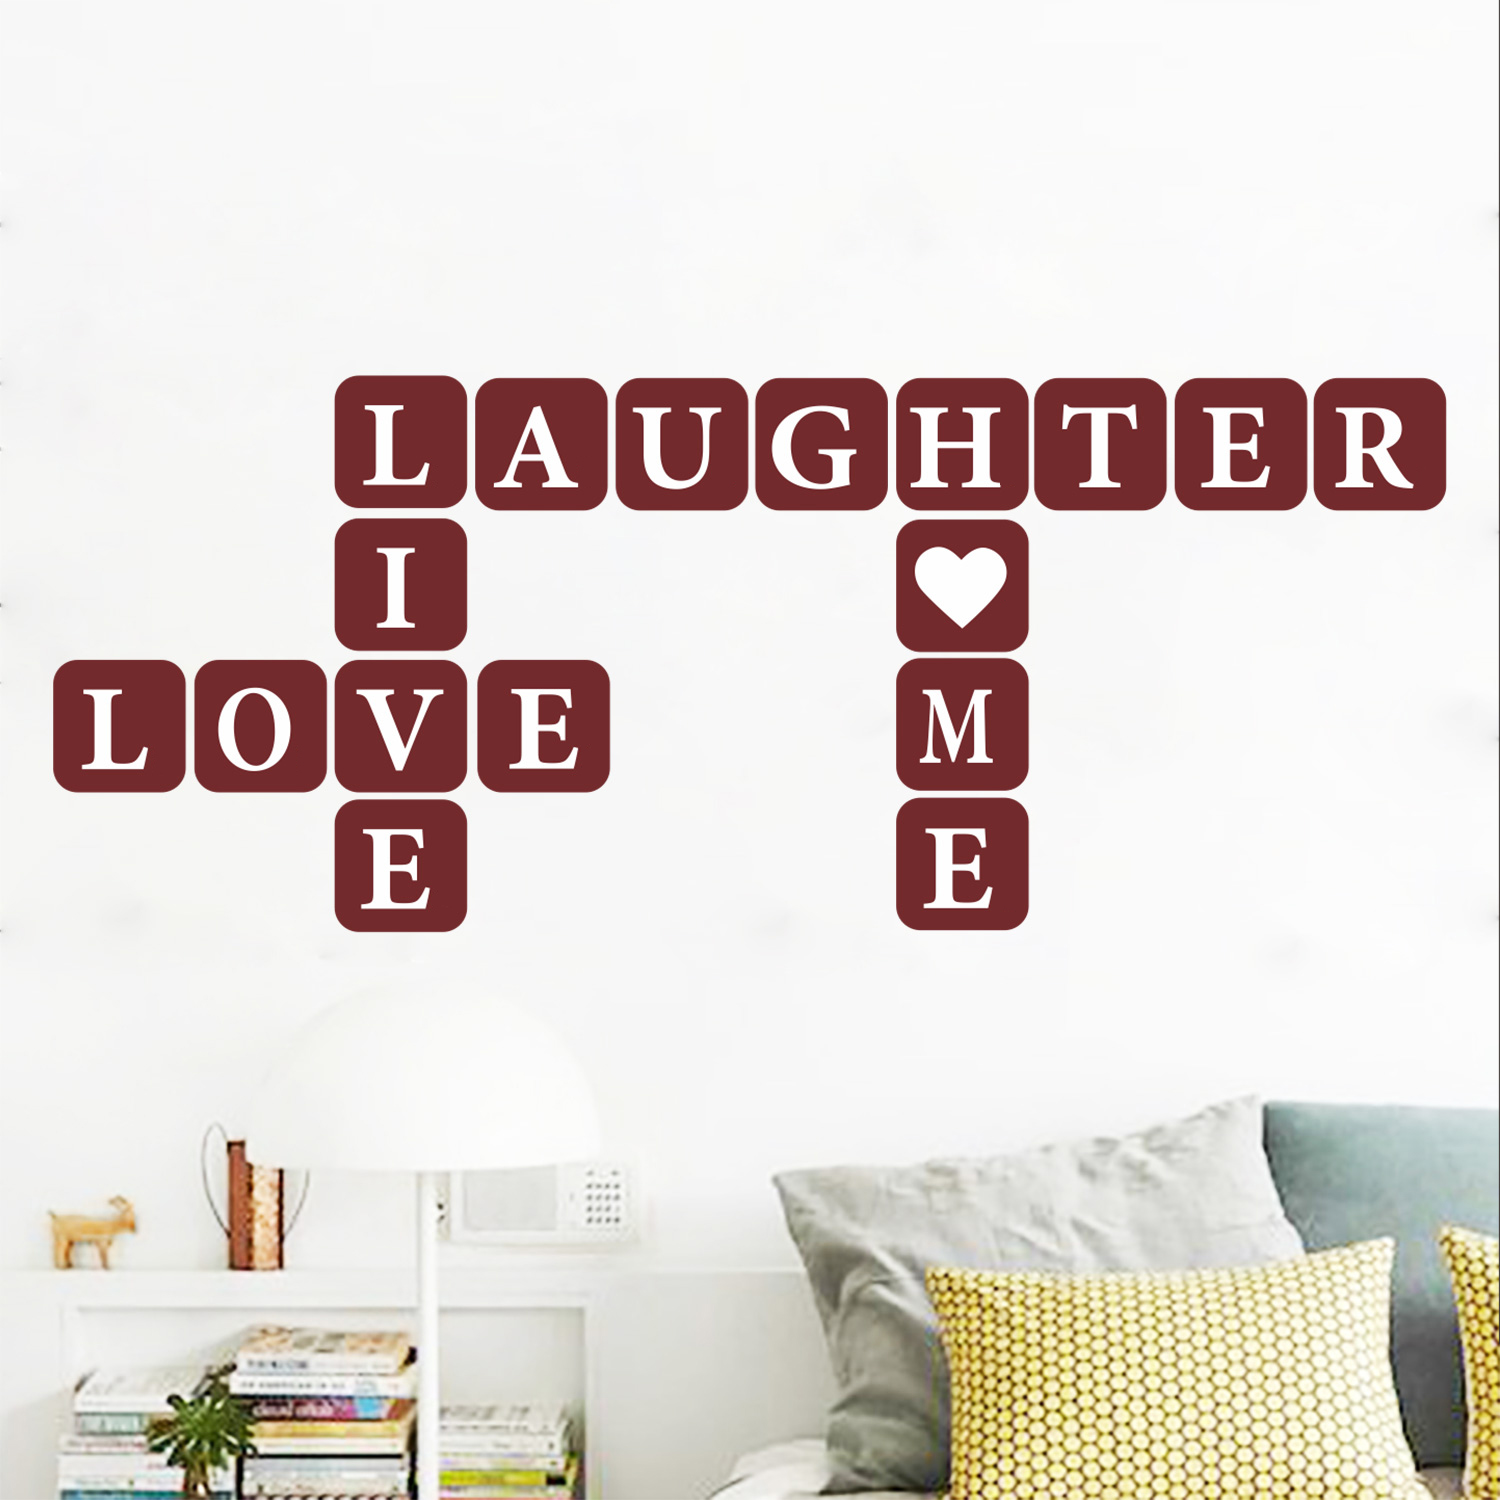 Wall Sticker Wall Decal Sticker Bedroom Love is.. people 2 name 60